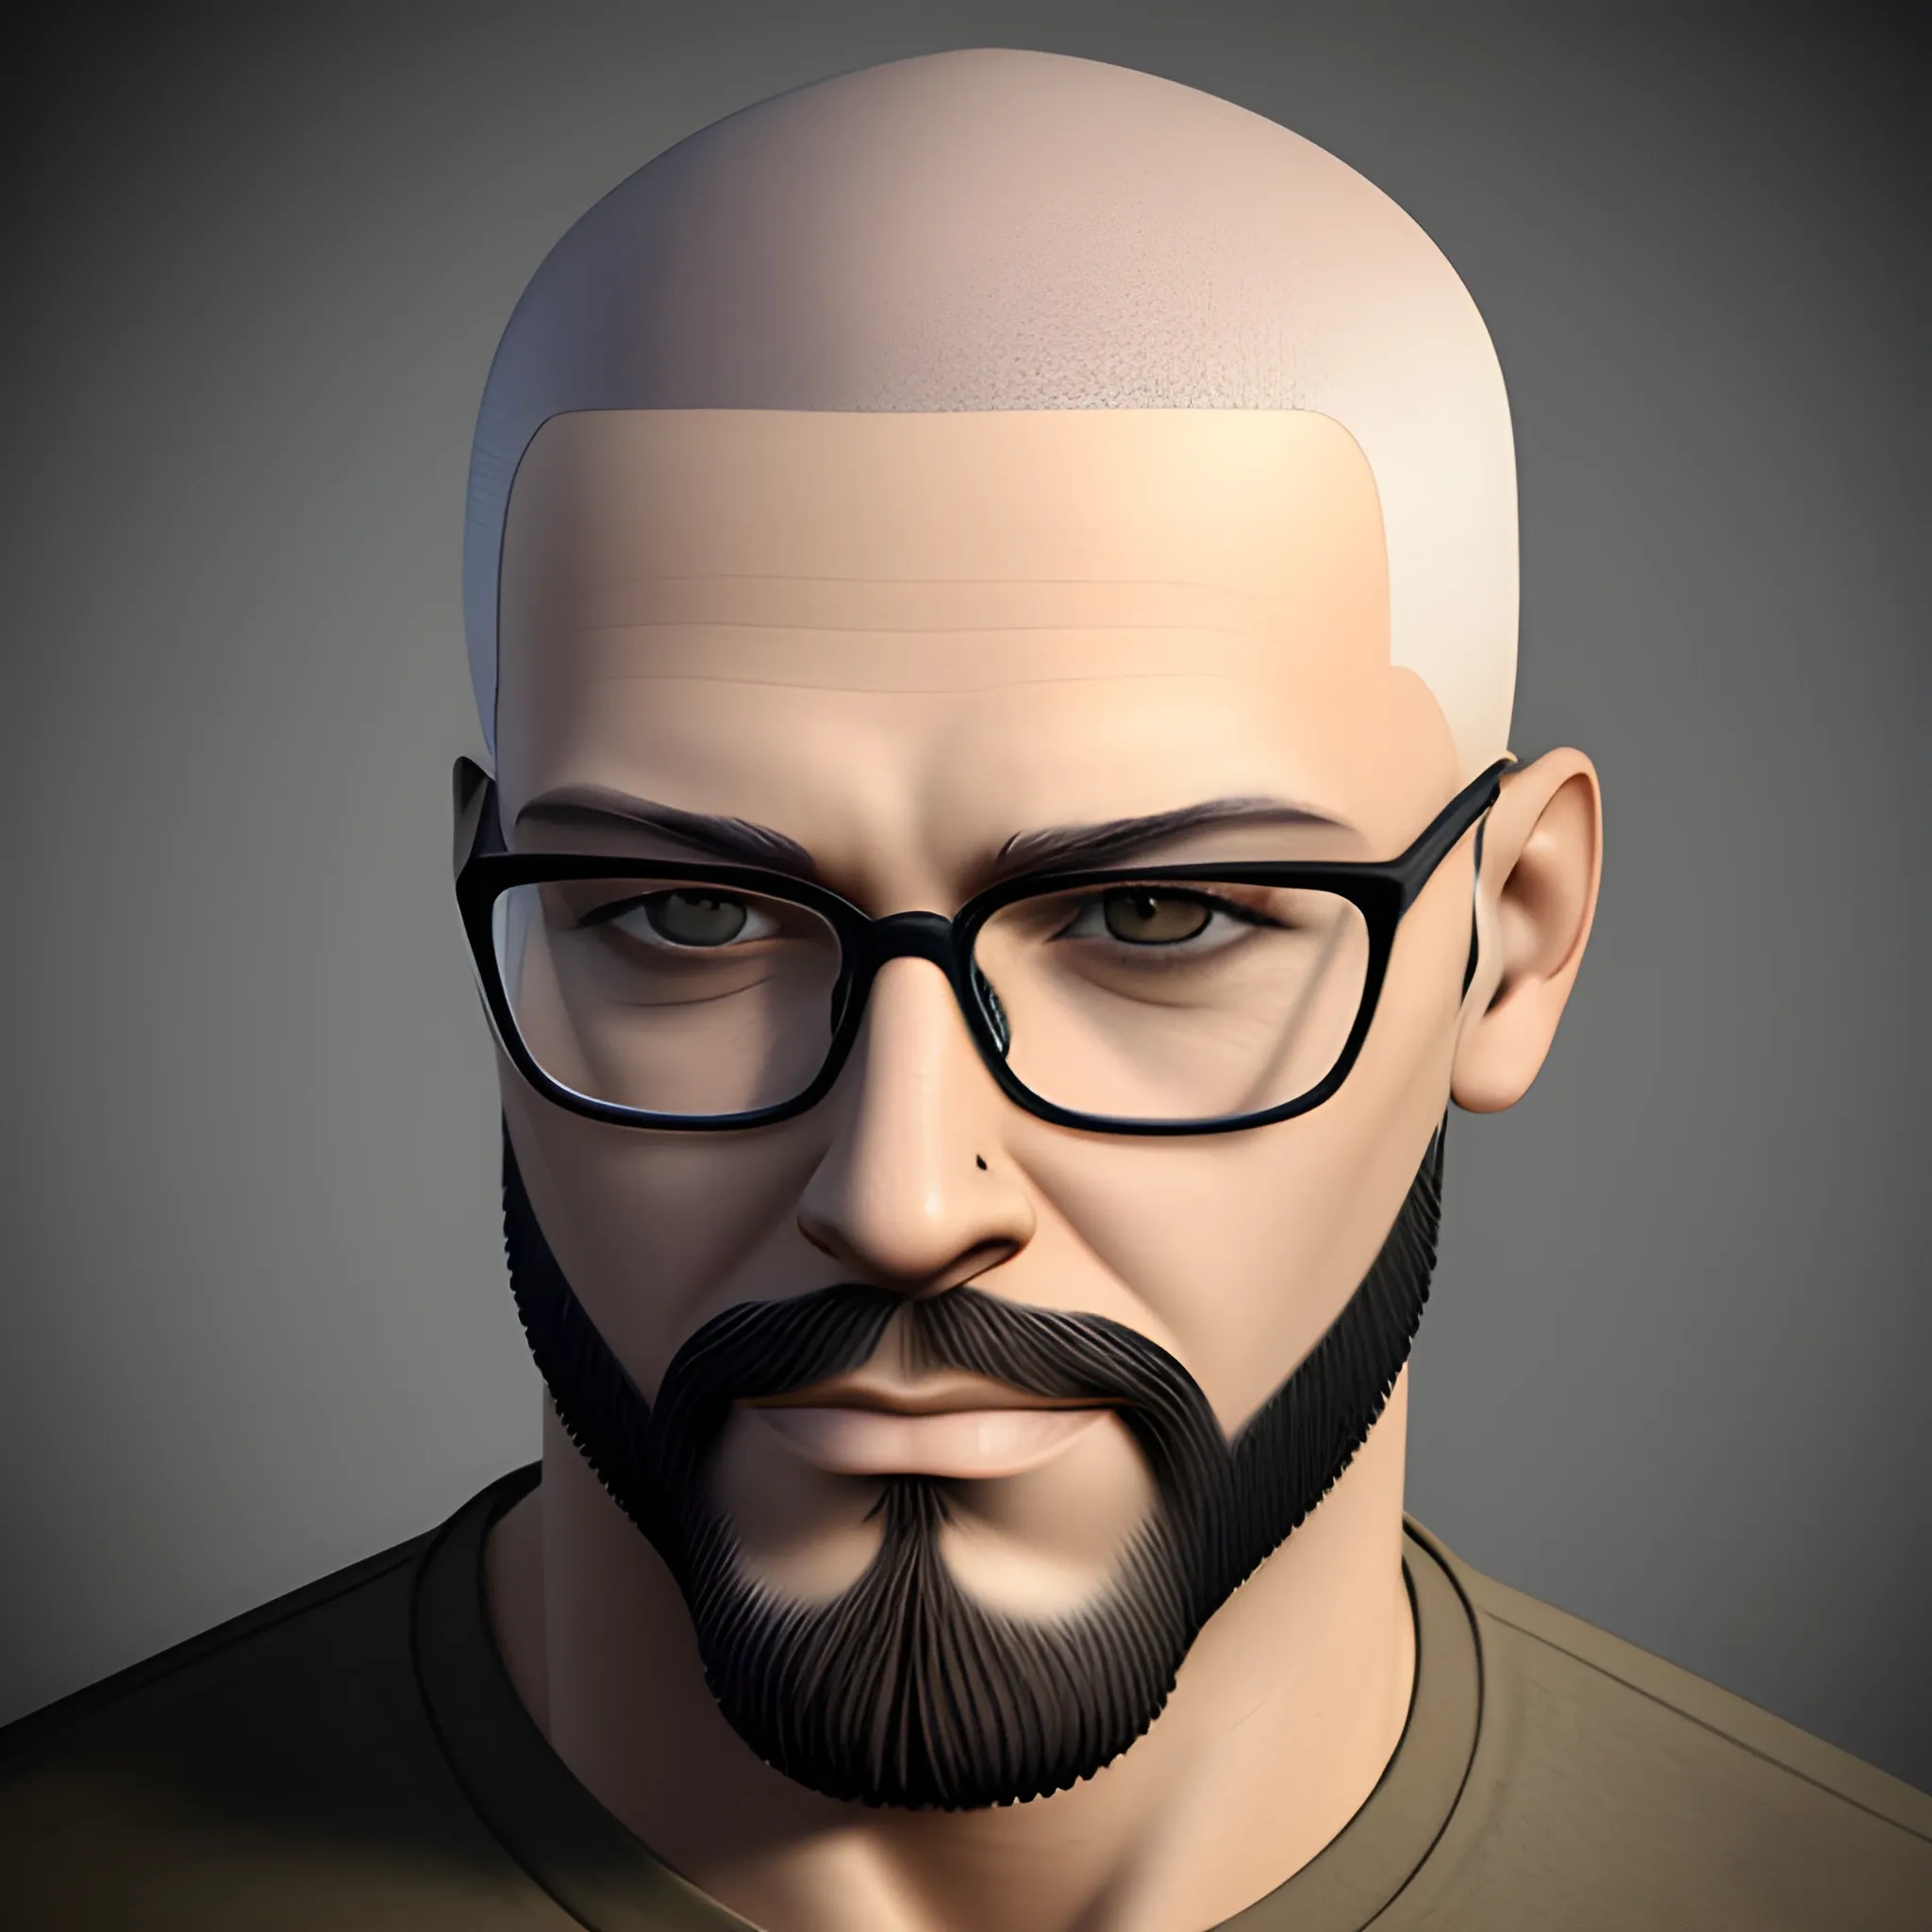 
, 3D  a man with shaved hair, beard and glasses. realistic and urban style
